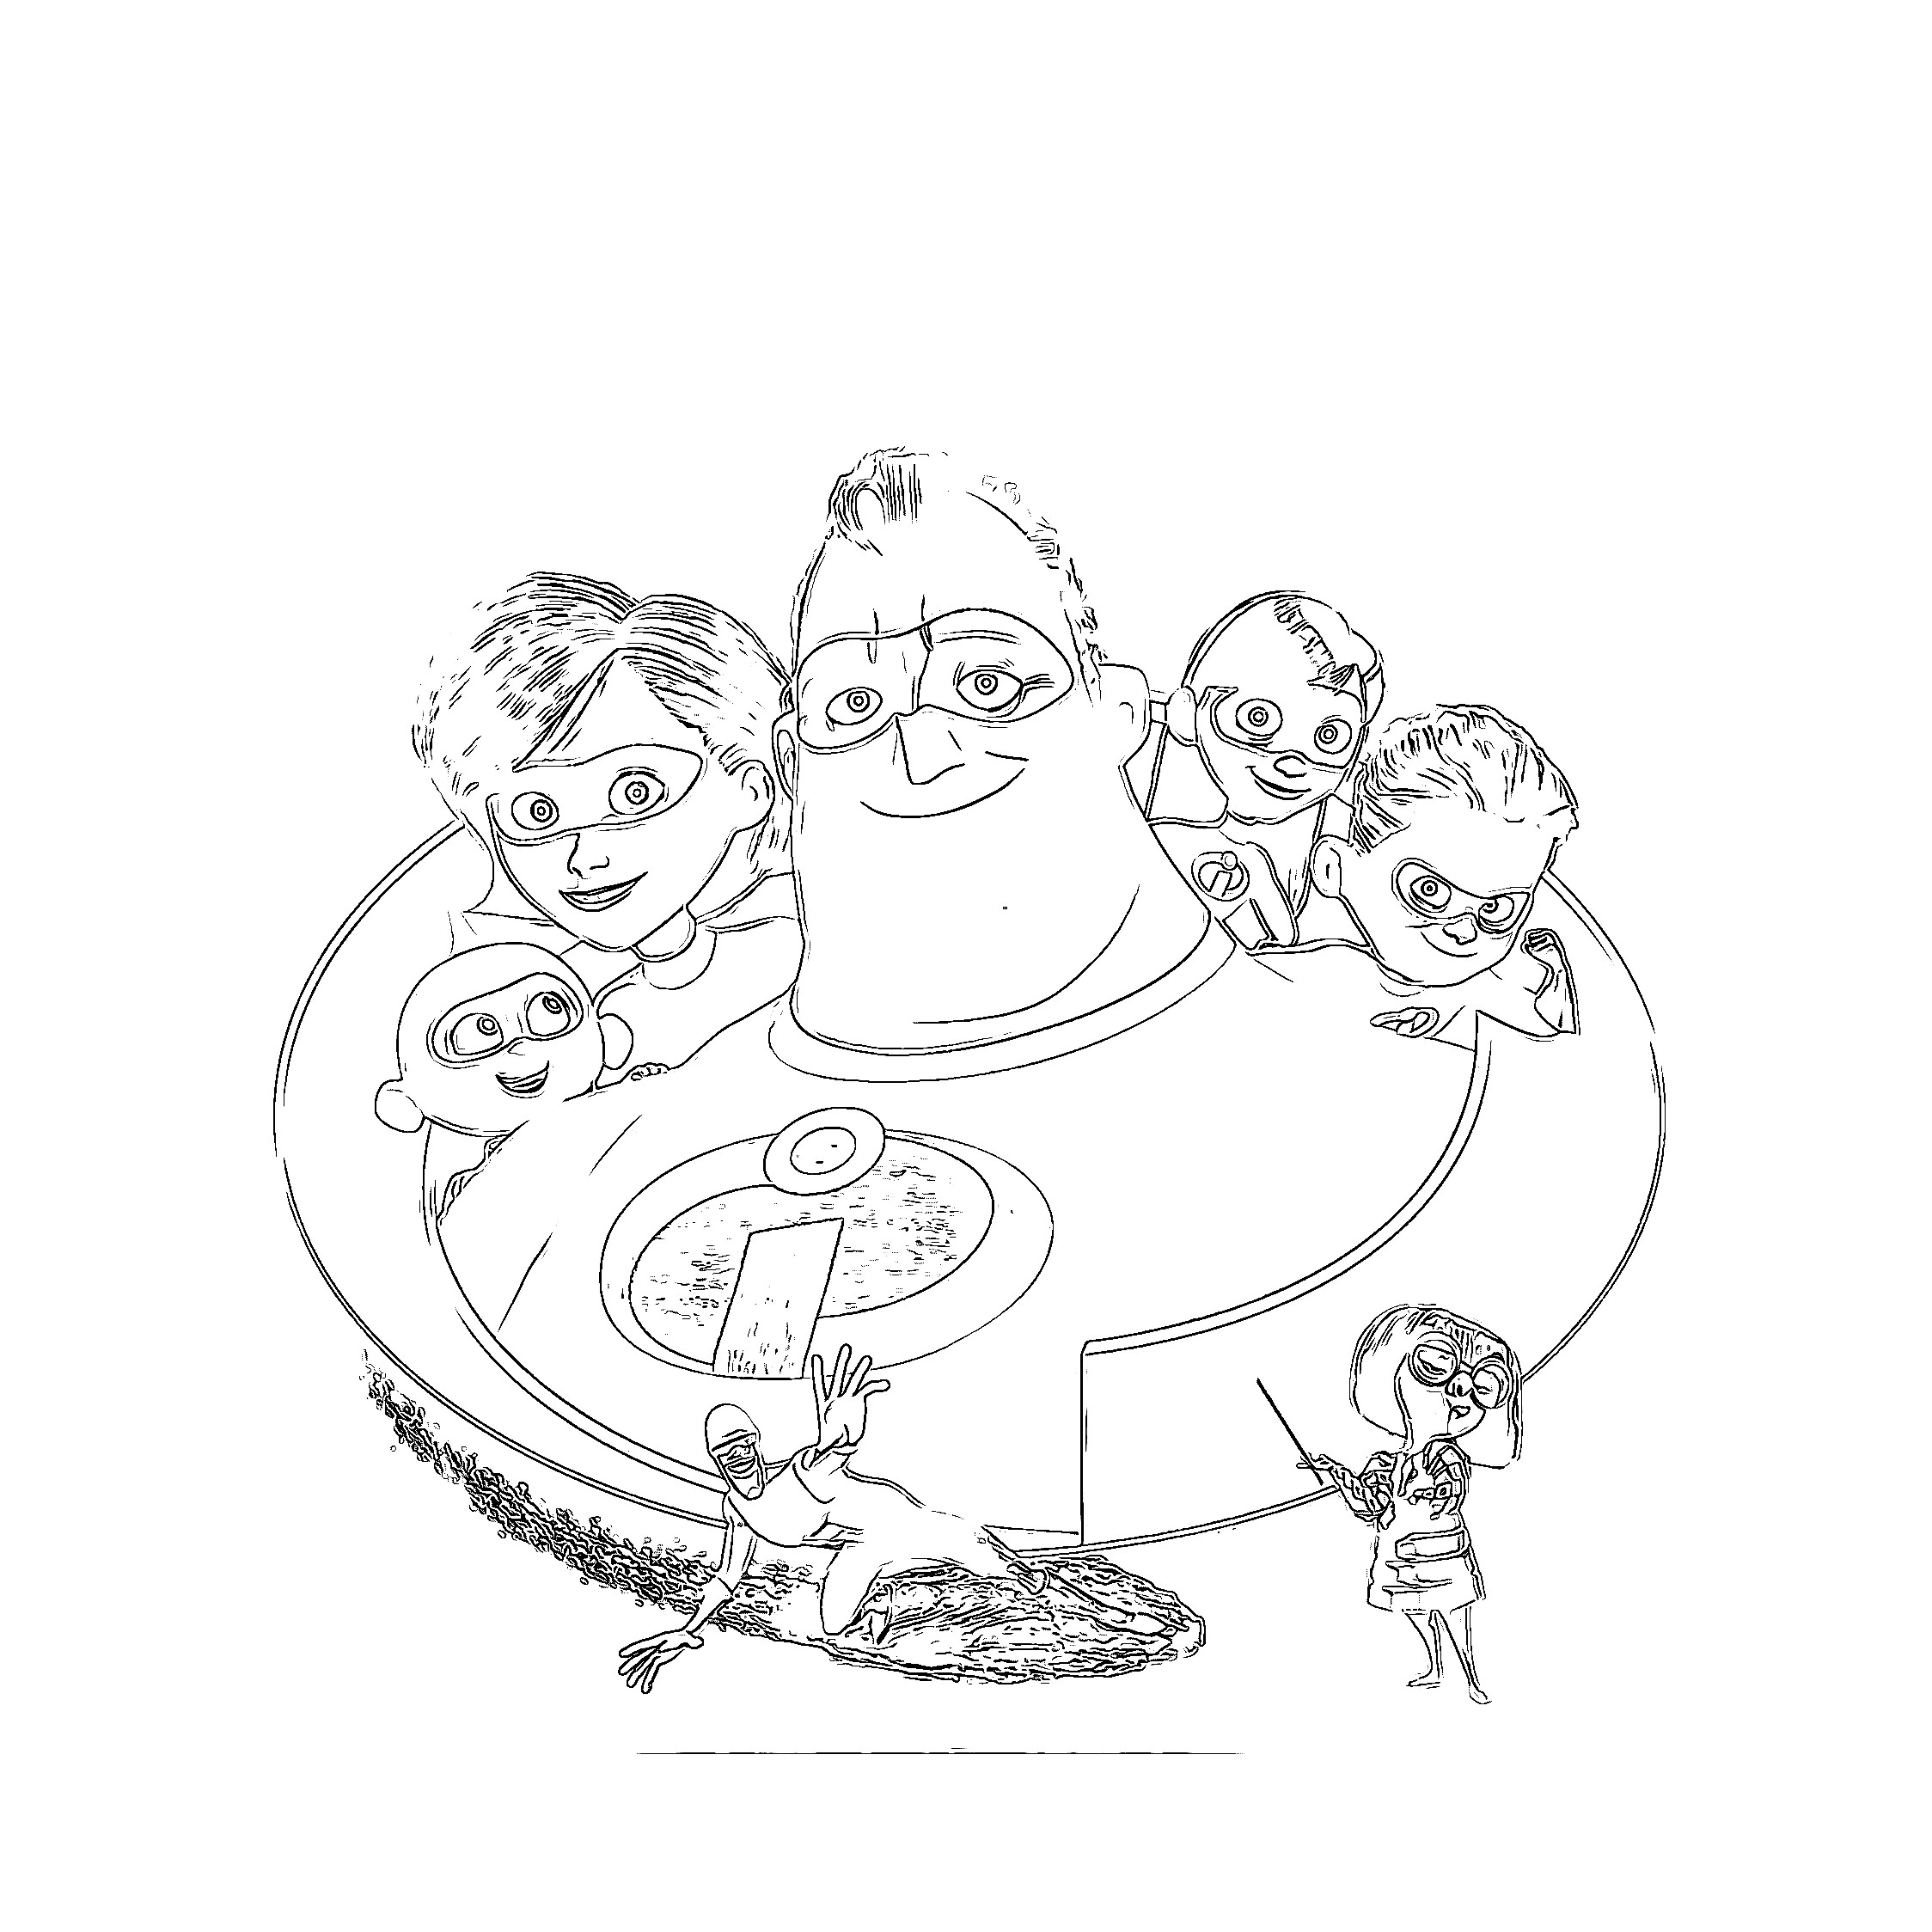 Great Incredibles 2 Coloring pages for the kids - Album on Imgur